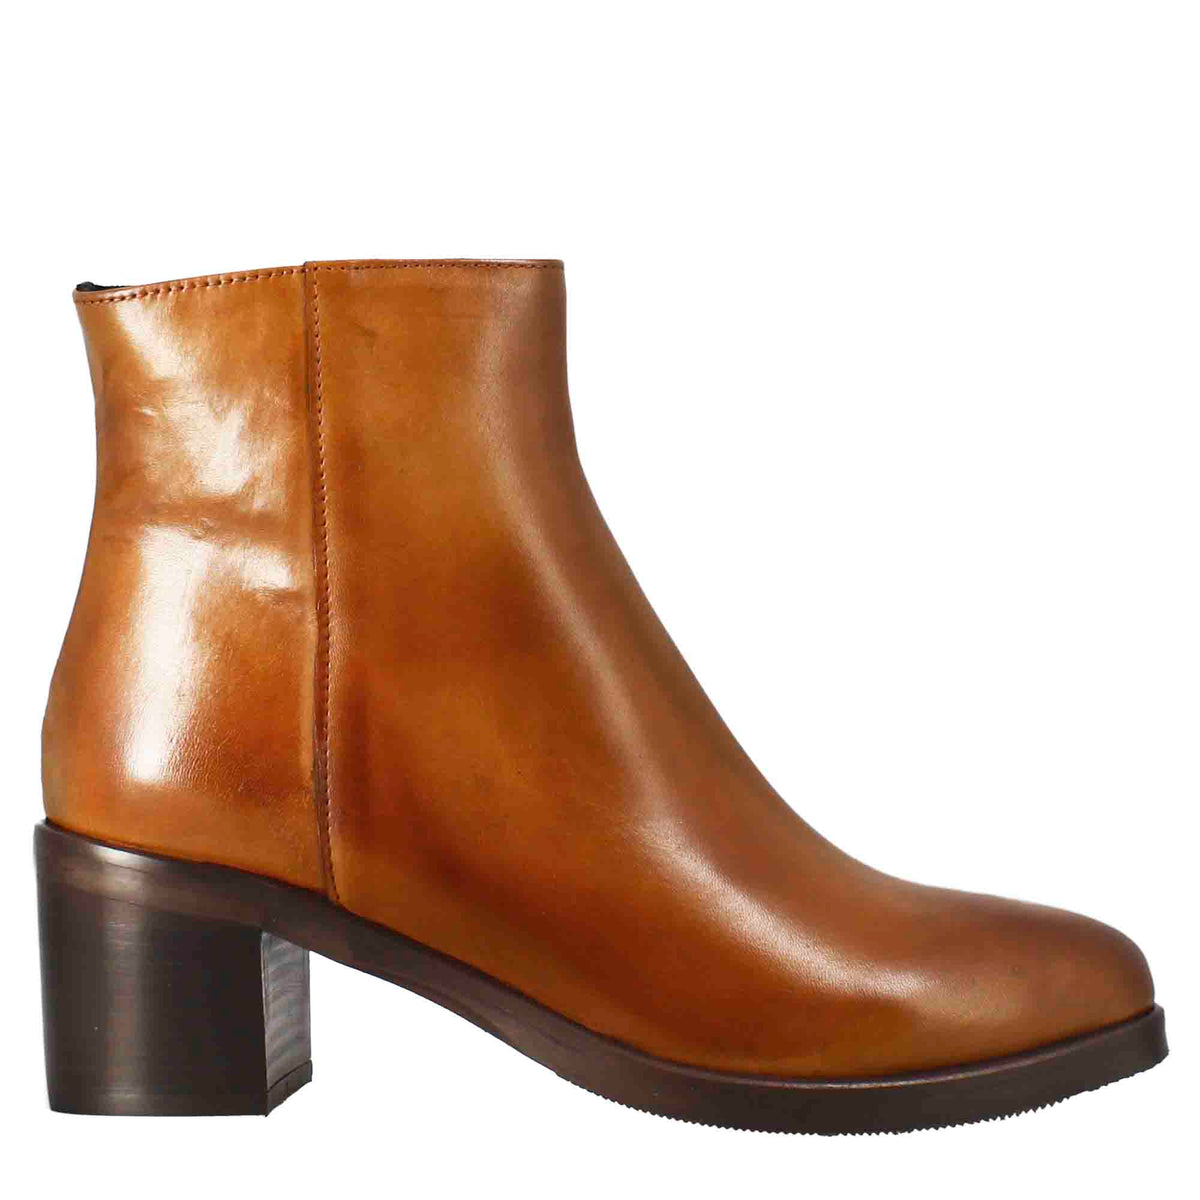 Smooth women's ankle boot with medium heel in brown leather